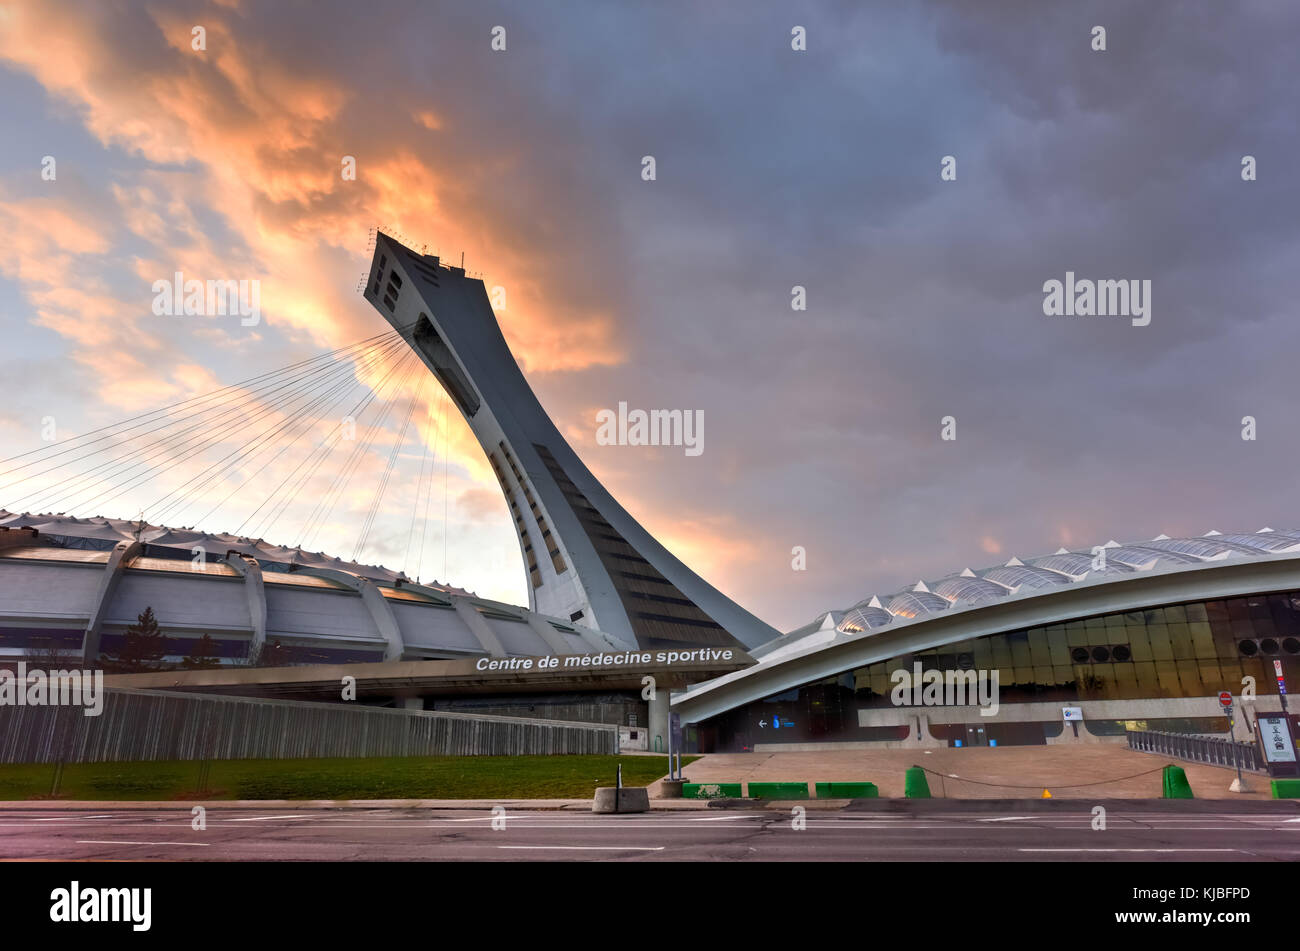 The Montreal Olympic Stadium and tower at sunset. It's the tallest inclined tower in the world.Tour Olympique stands 175 meters tall and at a 45-degre Stock Photo